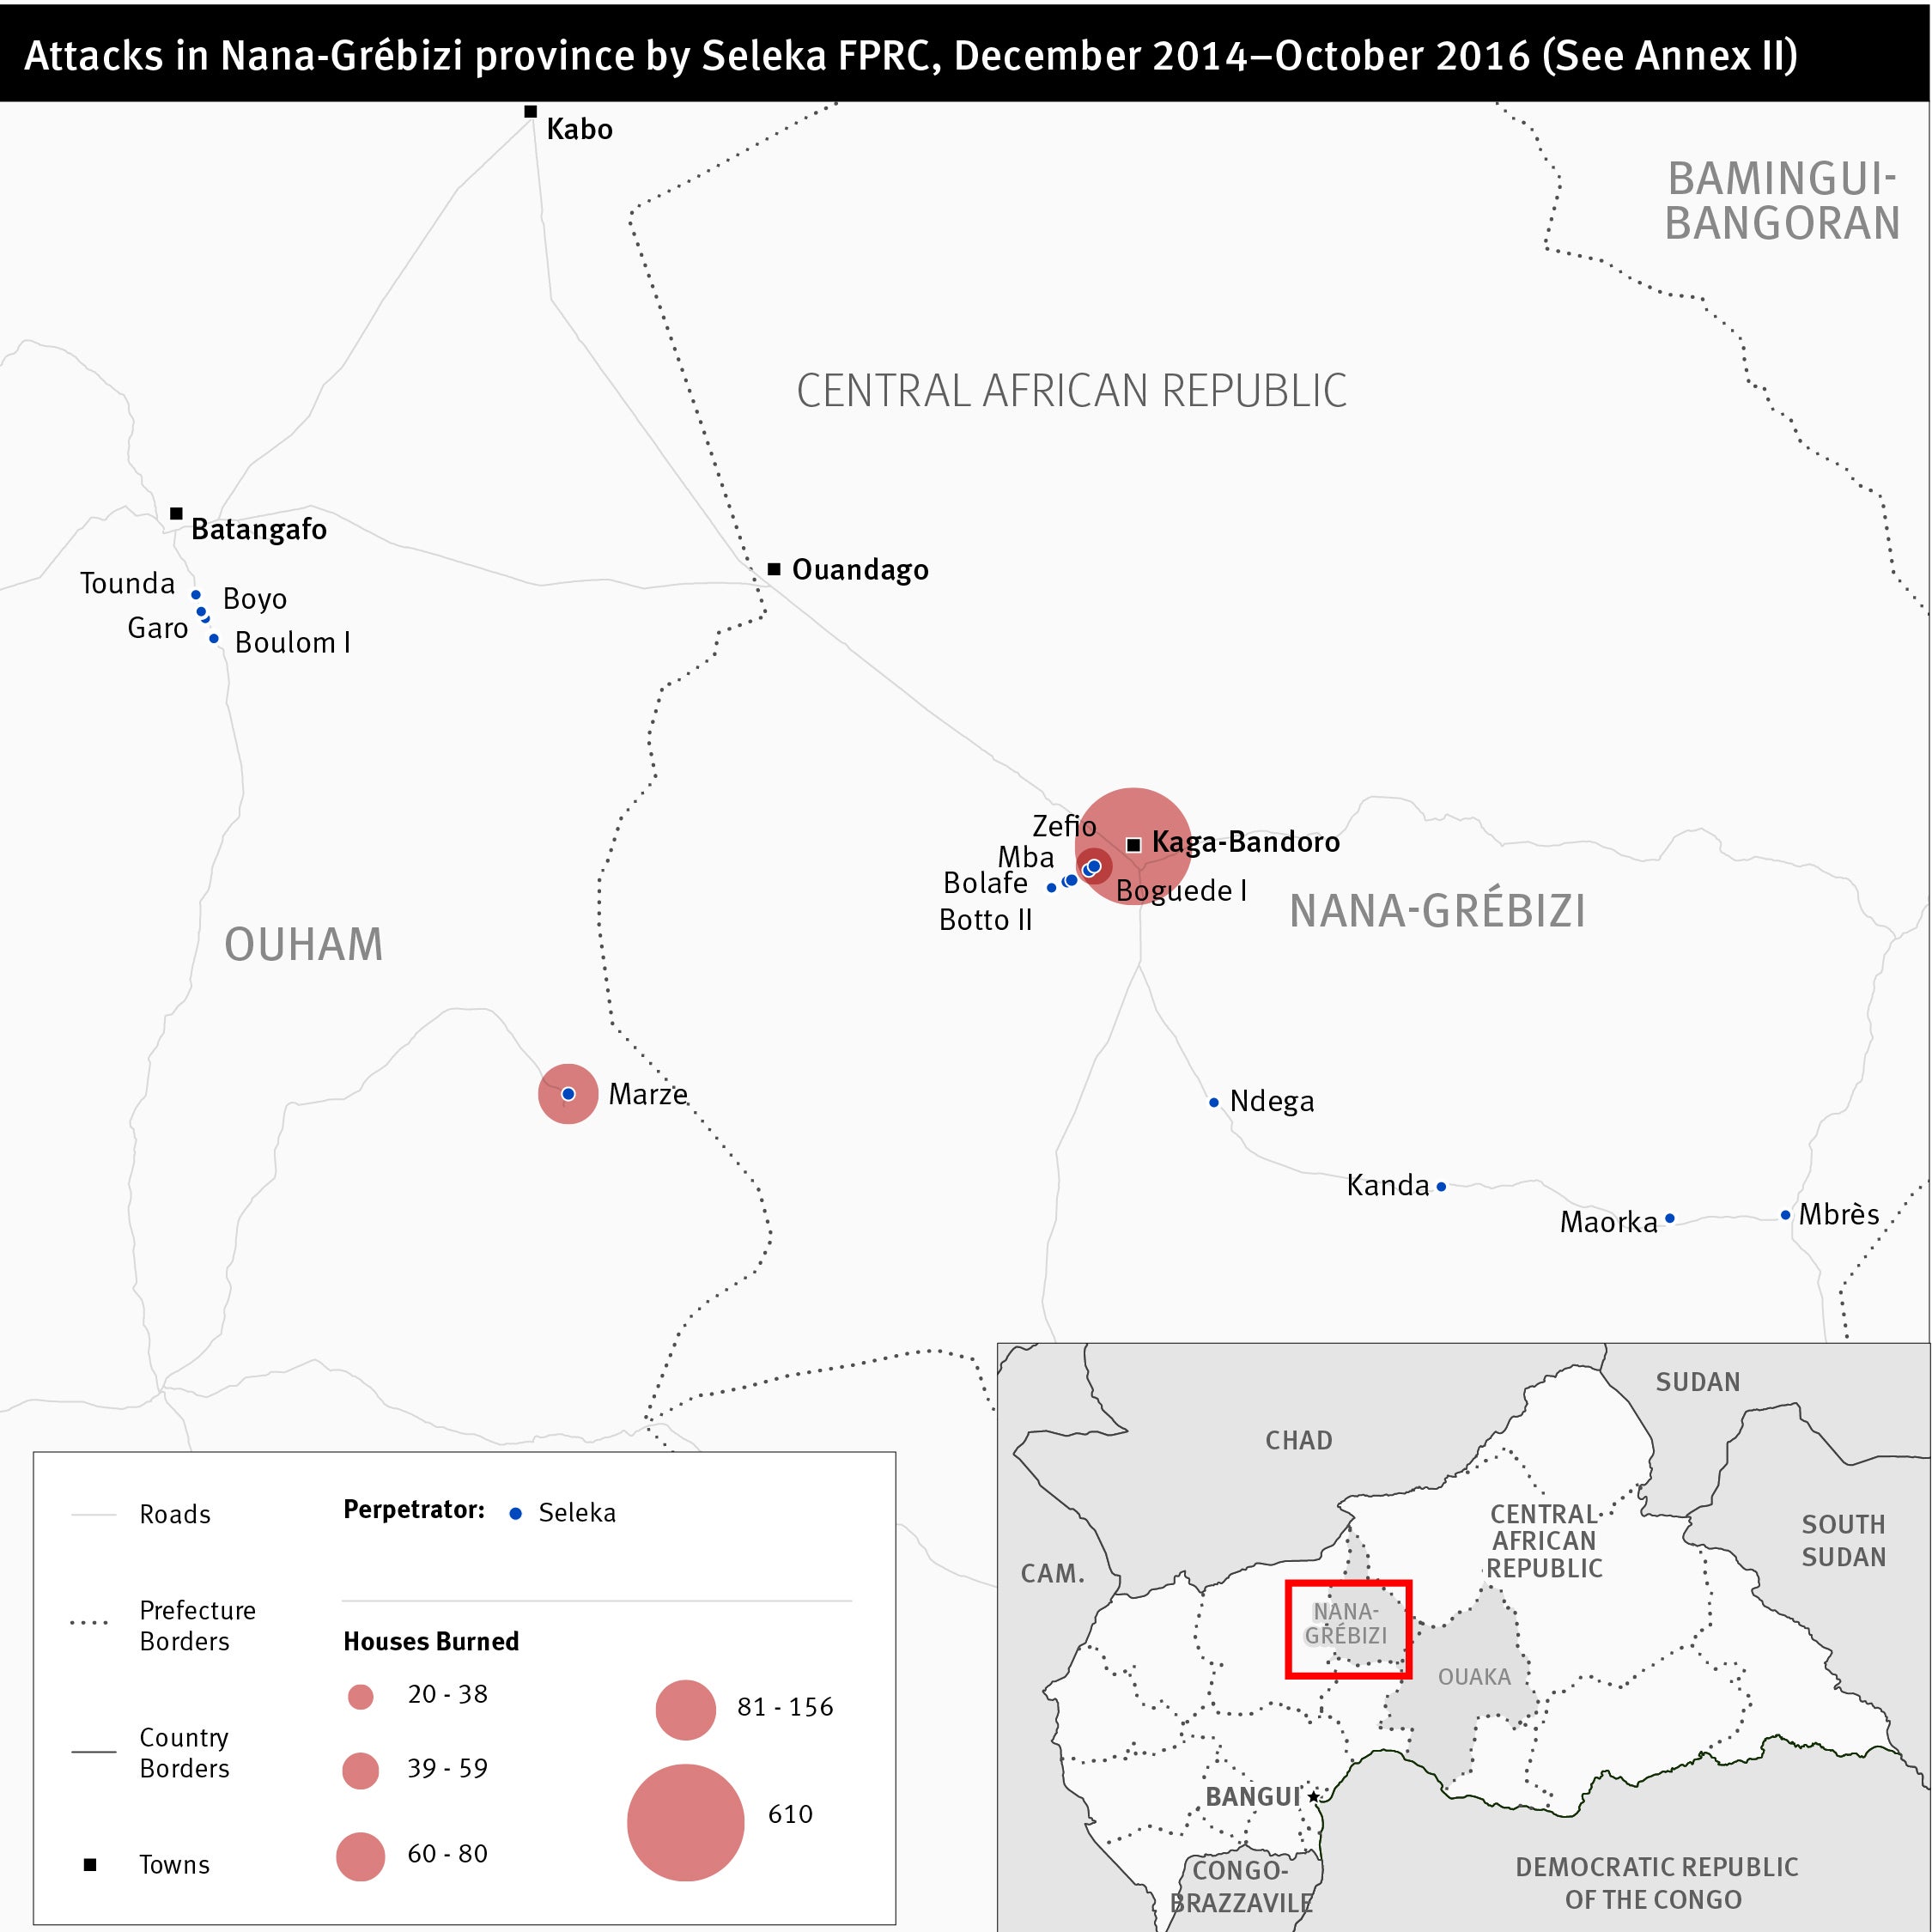 Map of Central African Republic attacks in the Nana-Grébizi province